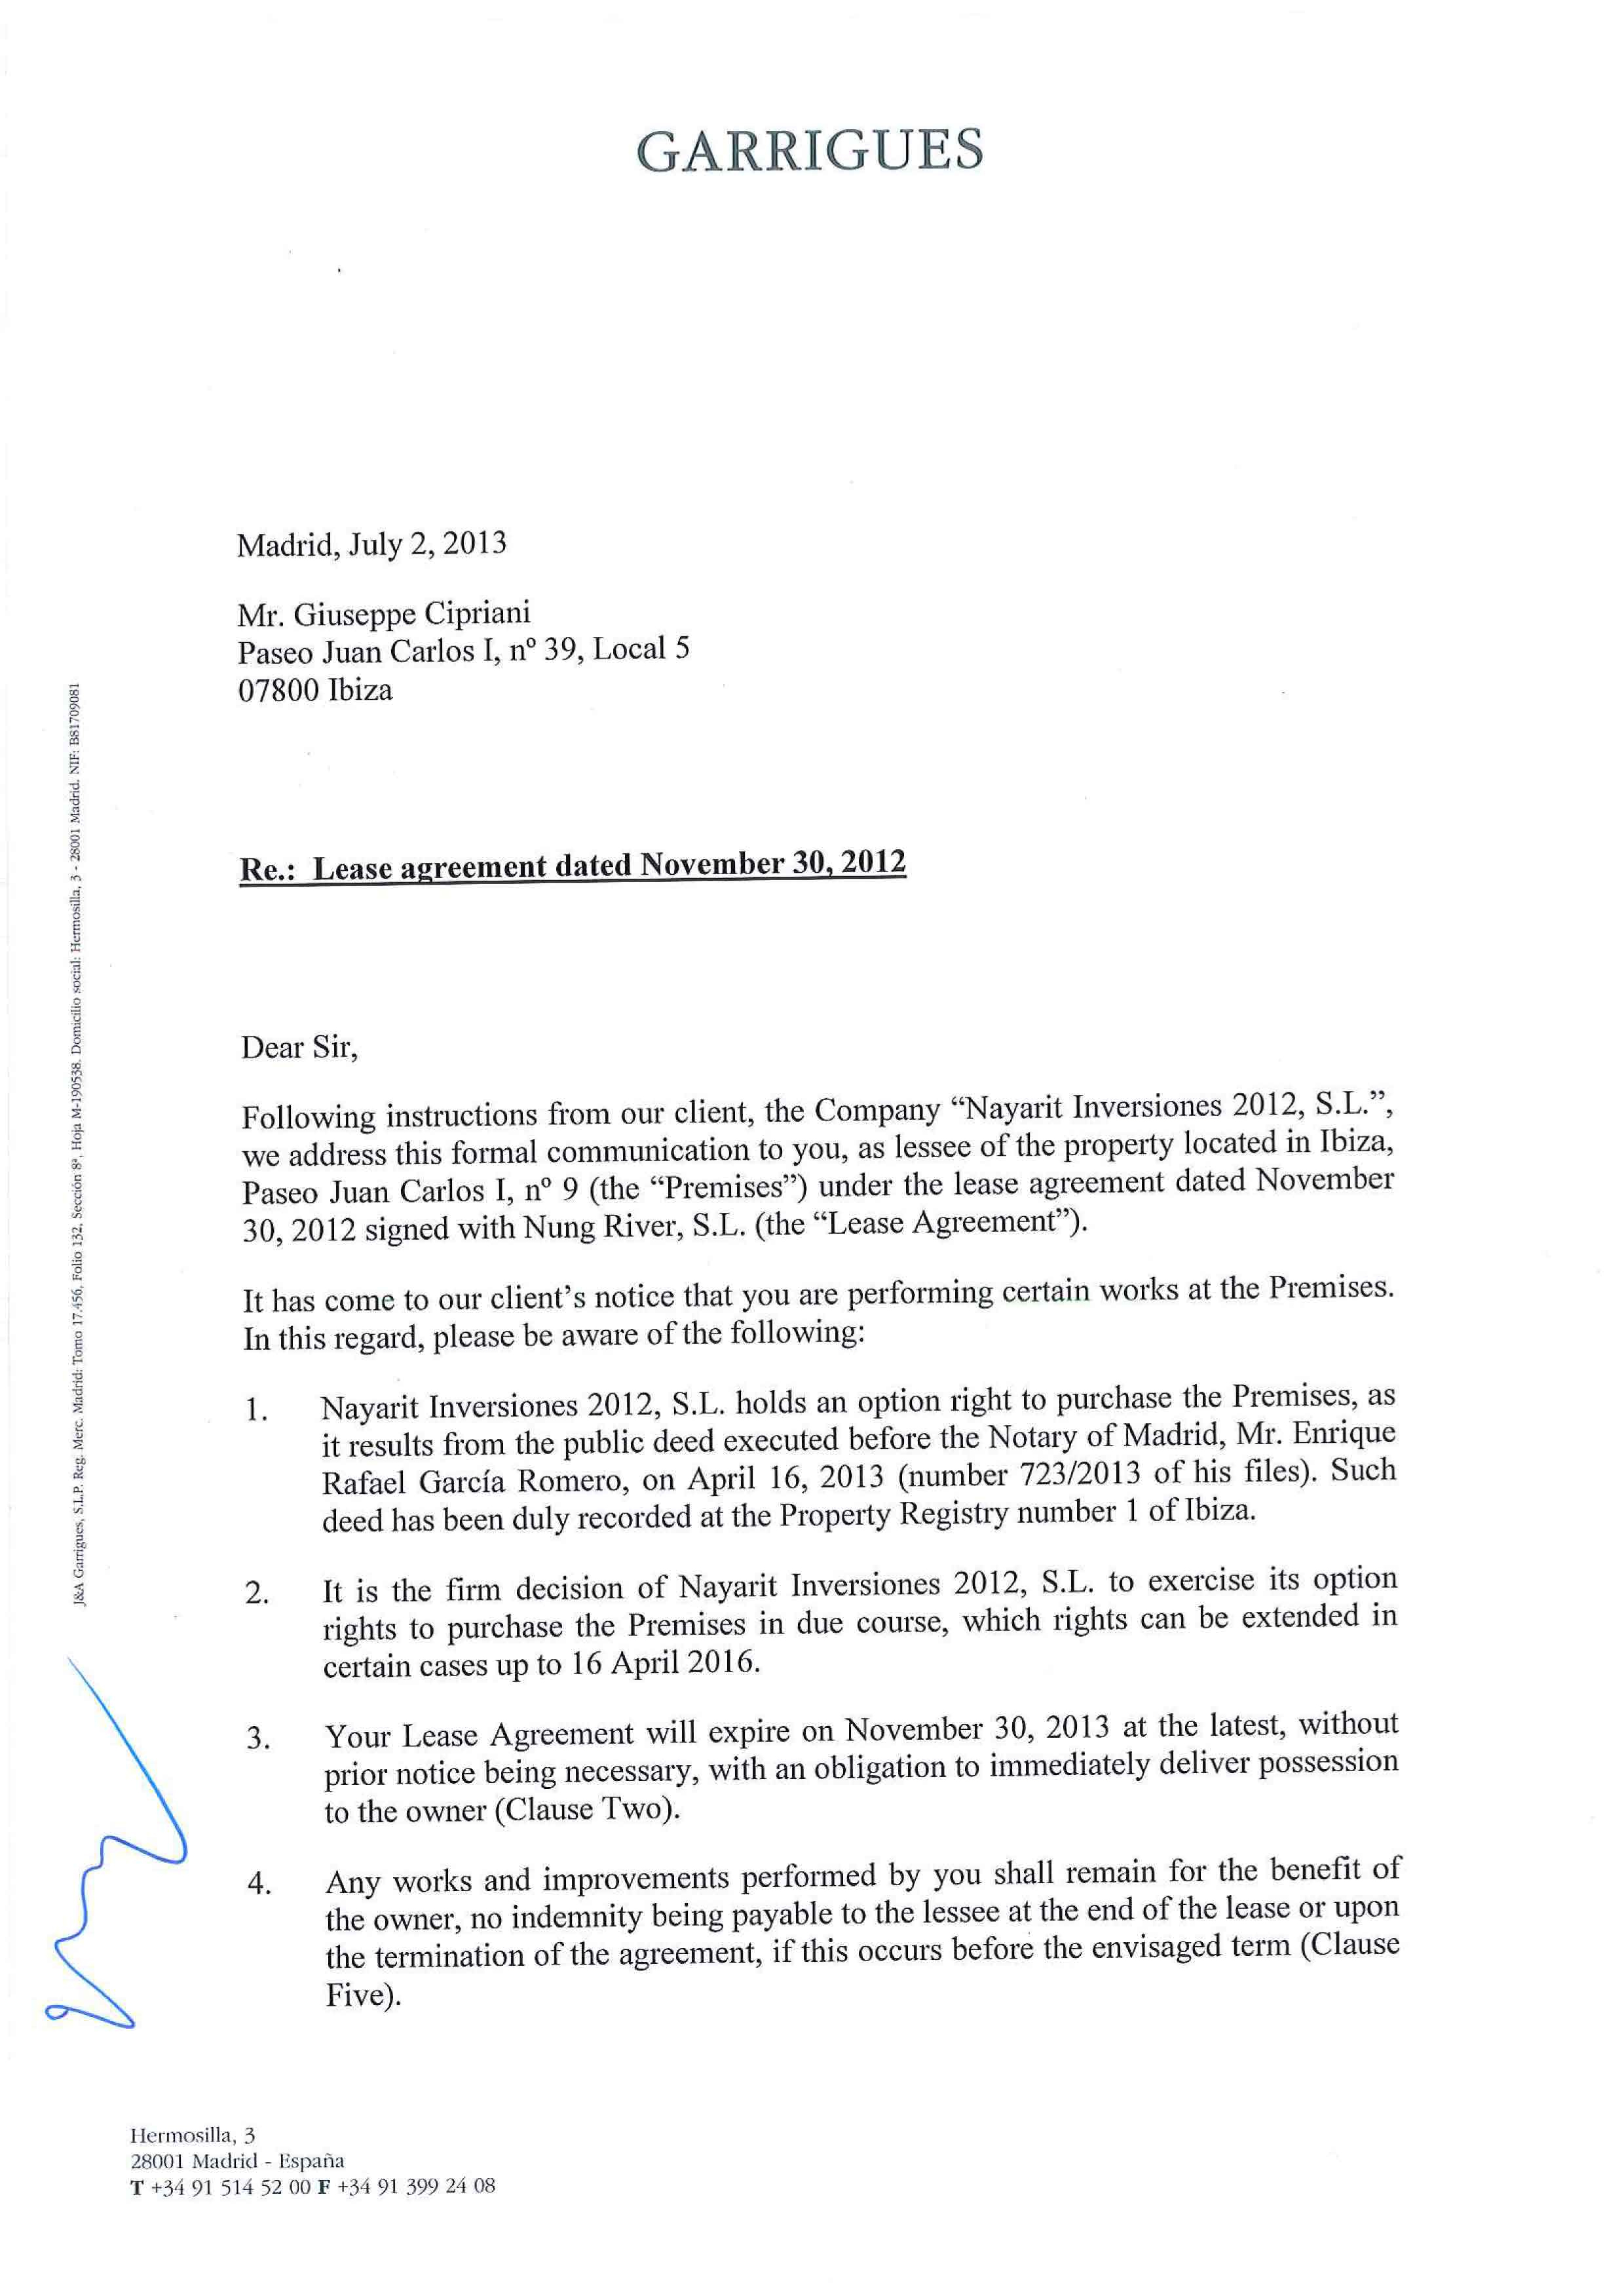 Tenancy Agreement Extension Letter Sample Letter Requesting Copy Of Lease Extension Of Agreement